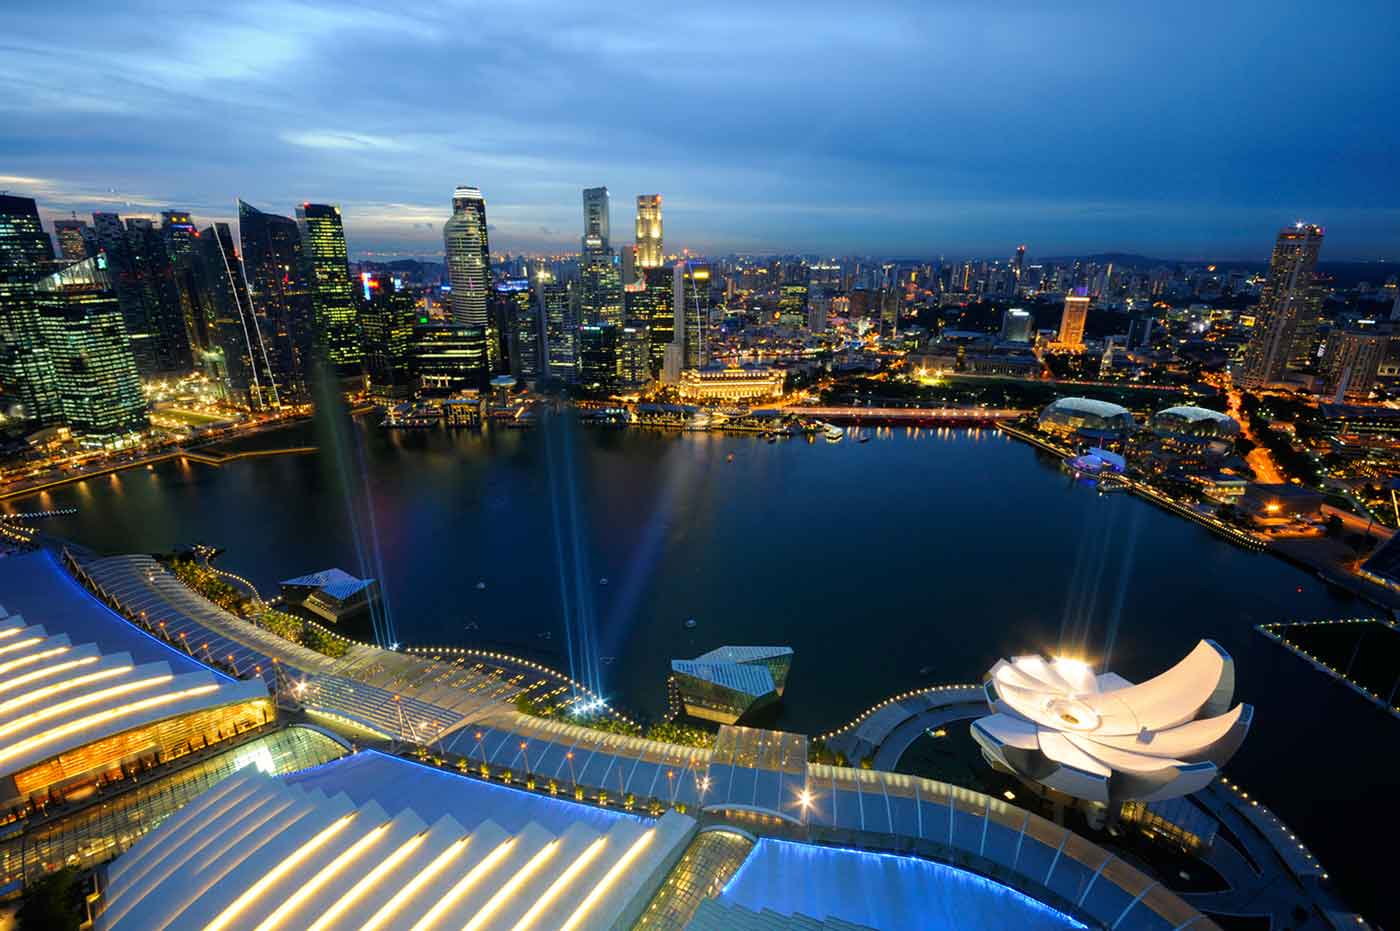 Marina Bay and the skyline of the Central Business District of Singapore at dusk, by William Cho.